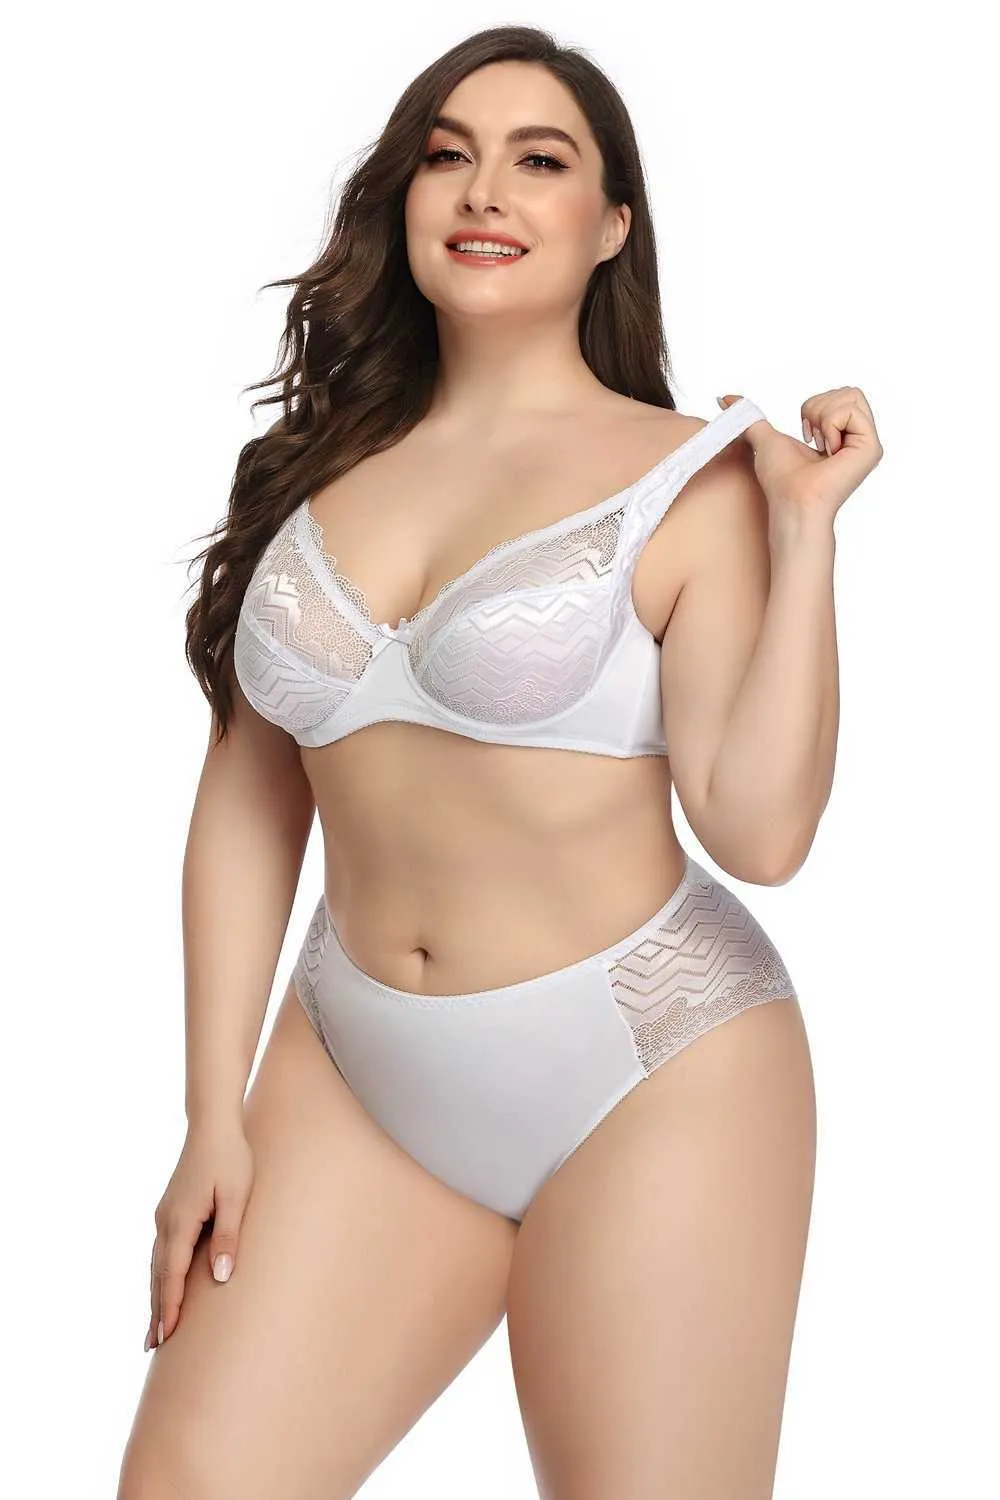 Womens Lace Bra And Panty Set, Plus Size Sexy Lingerie Set, Push Up Ultra  Thin Underwear Set Q0705 From Sihuai03, $18.08